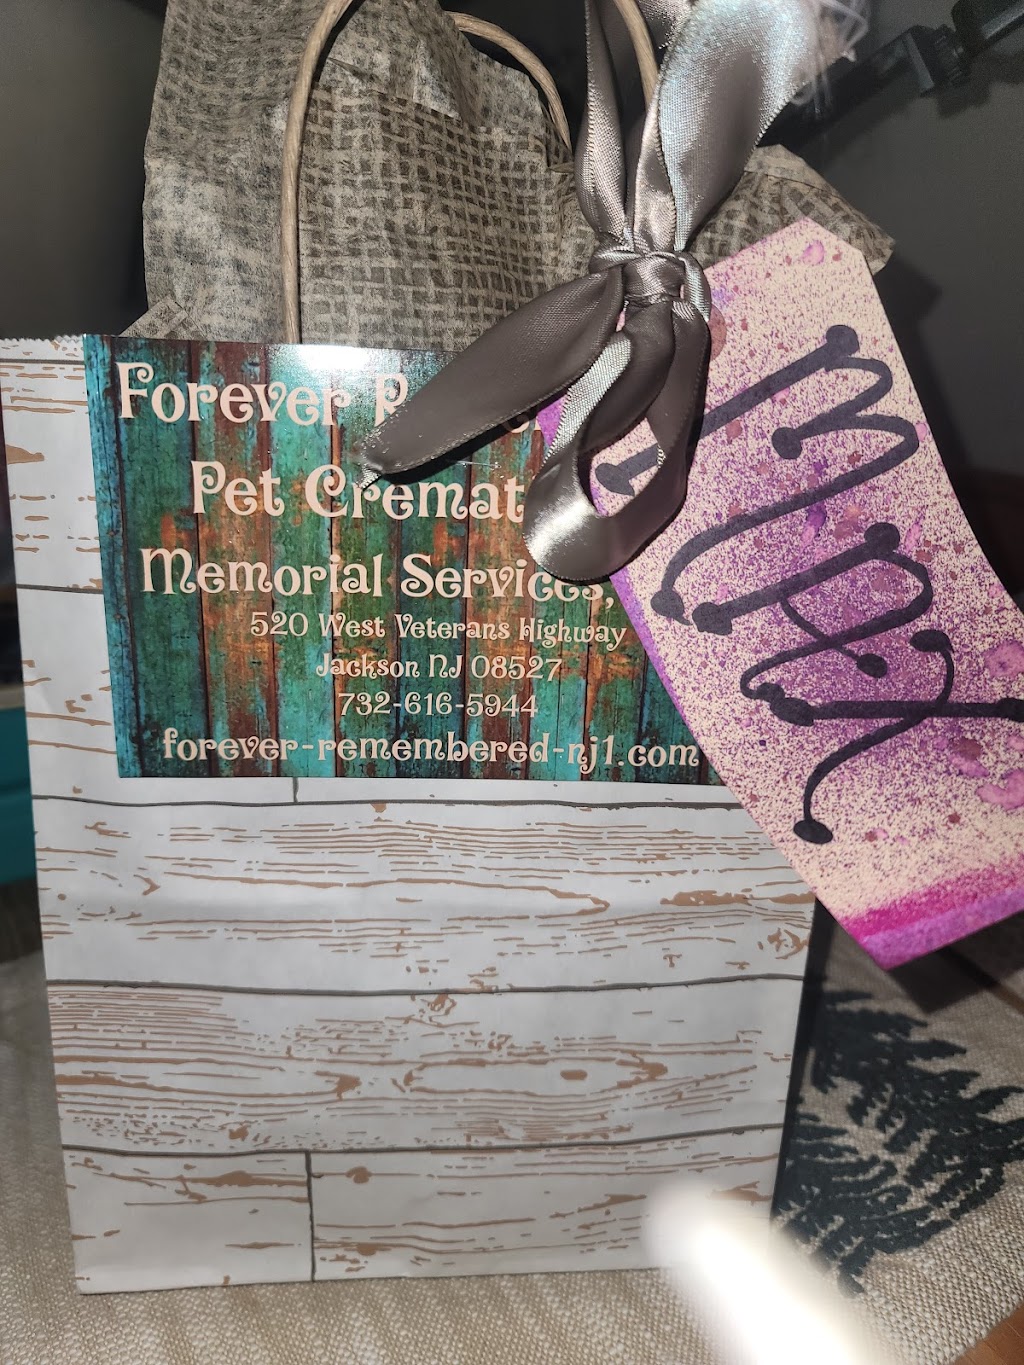 Forever Remembered Pet Cremation and Memorial Services, LLC | 520 W Veterans Hwy, Jackson Township, NJ 08527 | Phone: (732) 415-8472